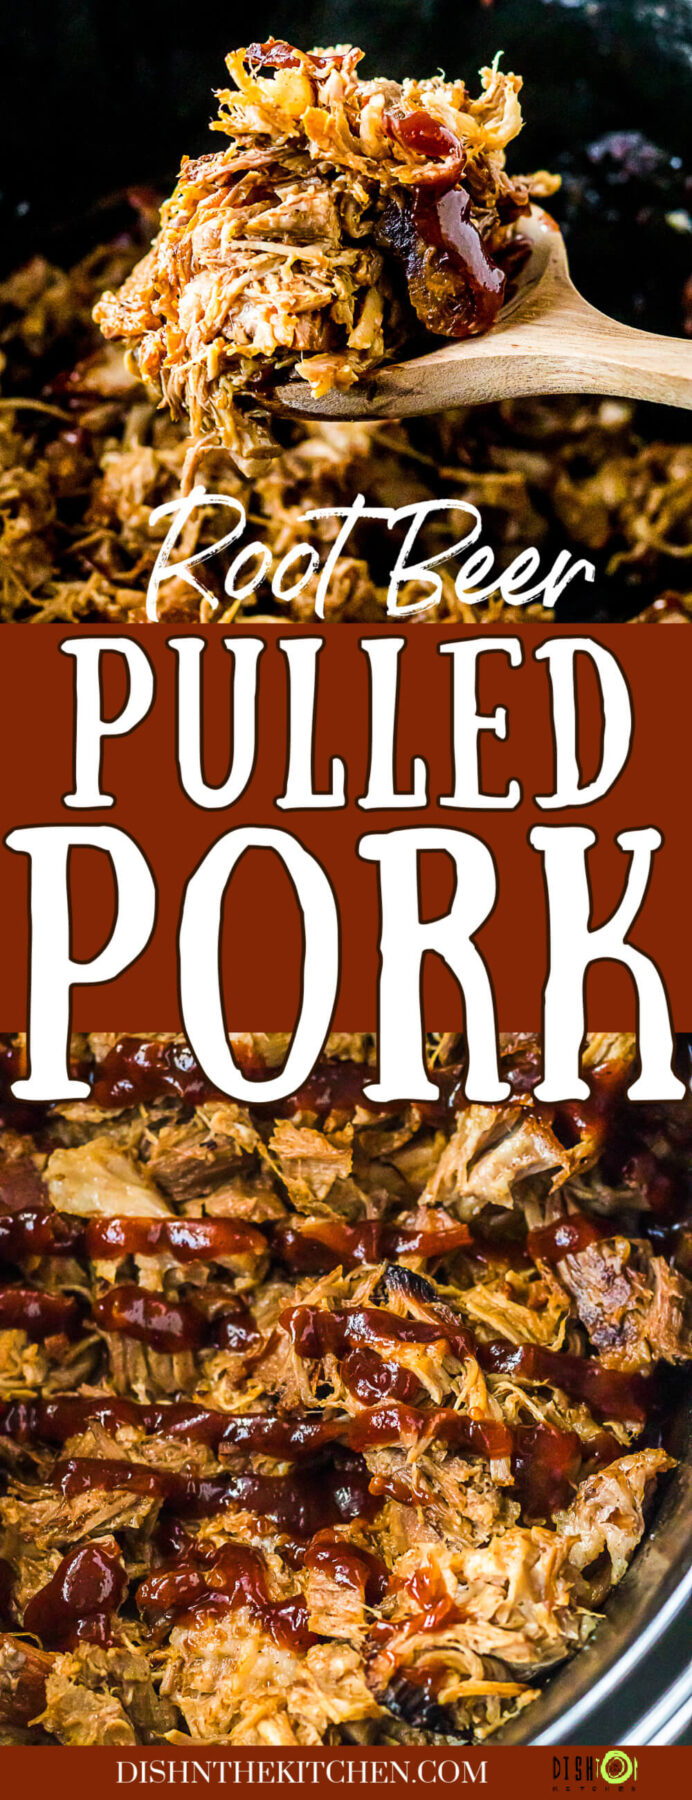 Pinterest image featuring tender pulled pork drizzled with barbecue sauce.